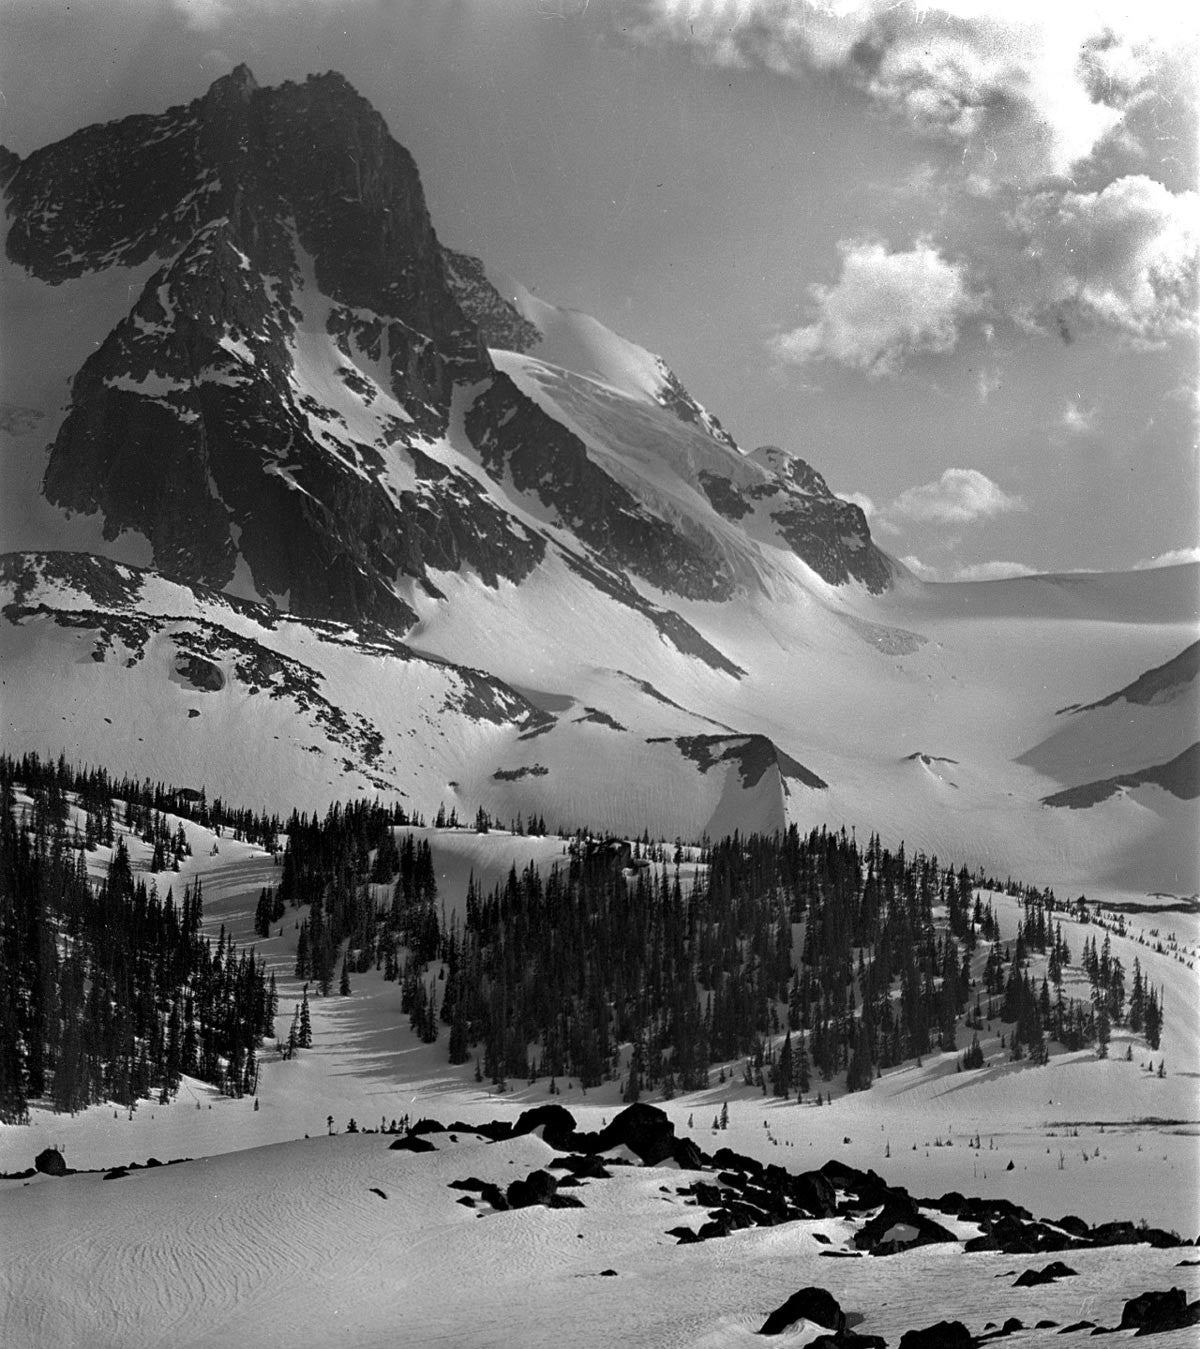 Snow-covered mountain peak in striking black and white.